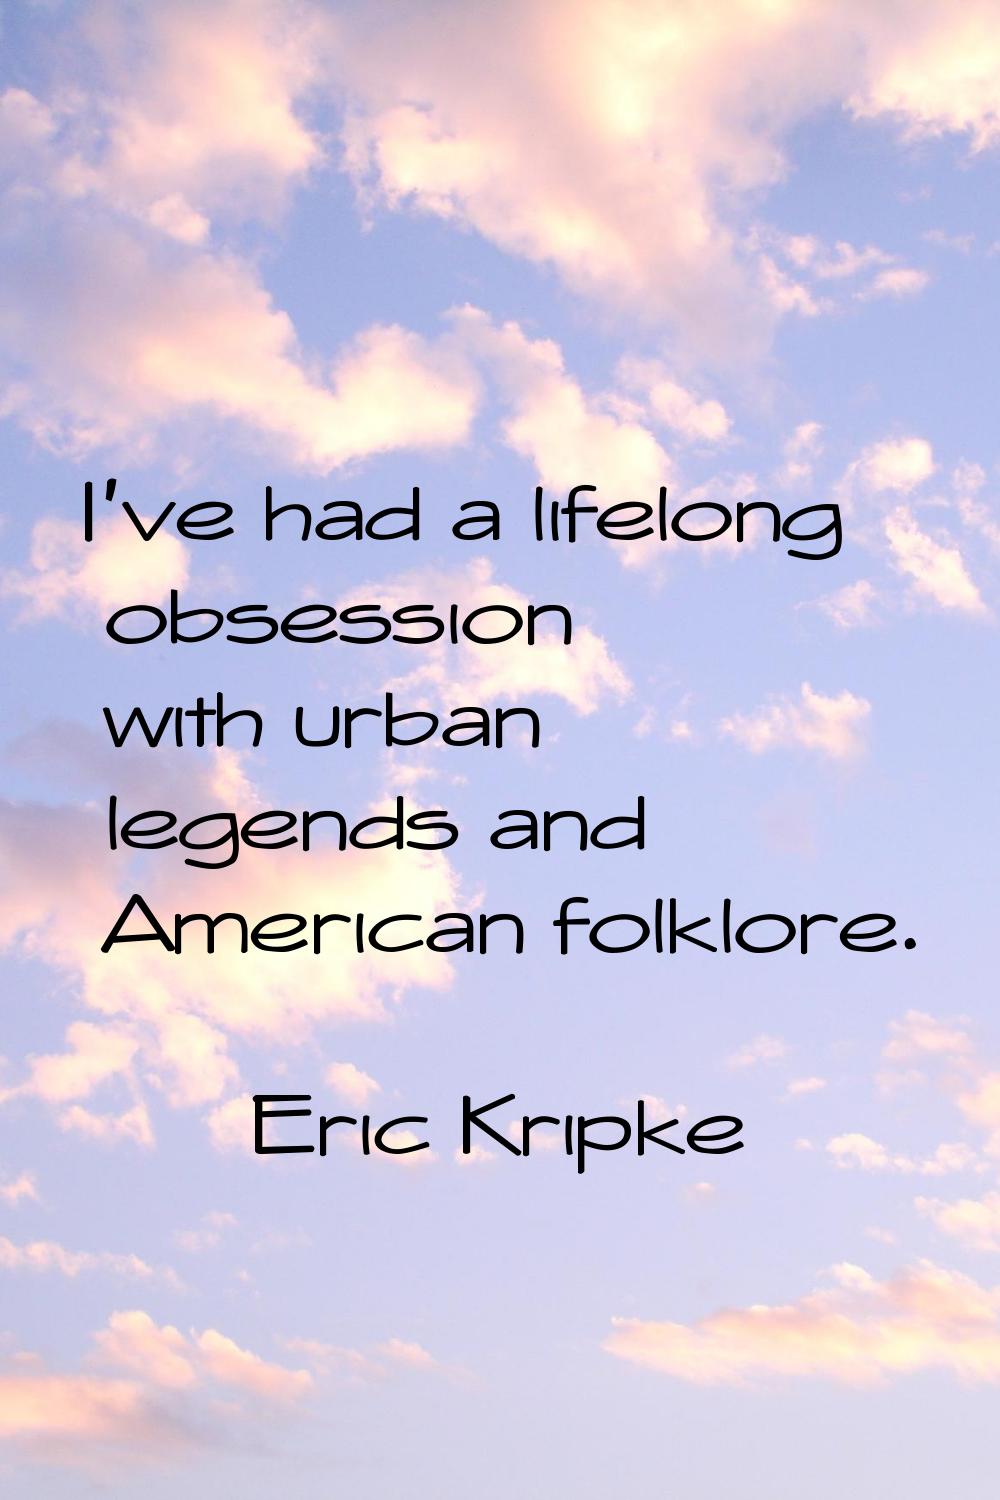 I've had a lifelong obsession with urban legends and American folklore.